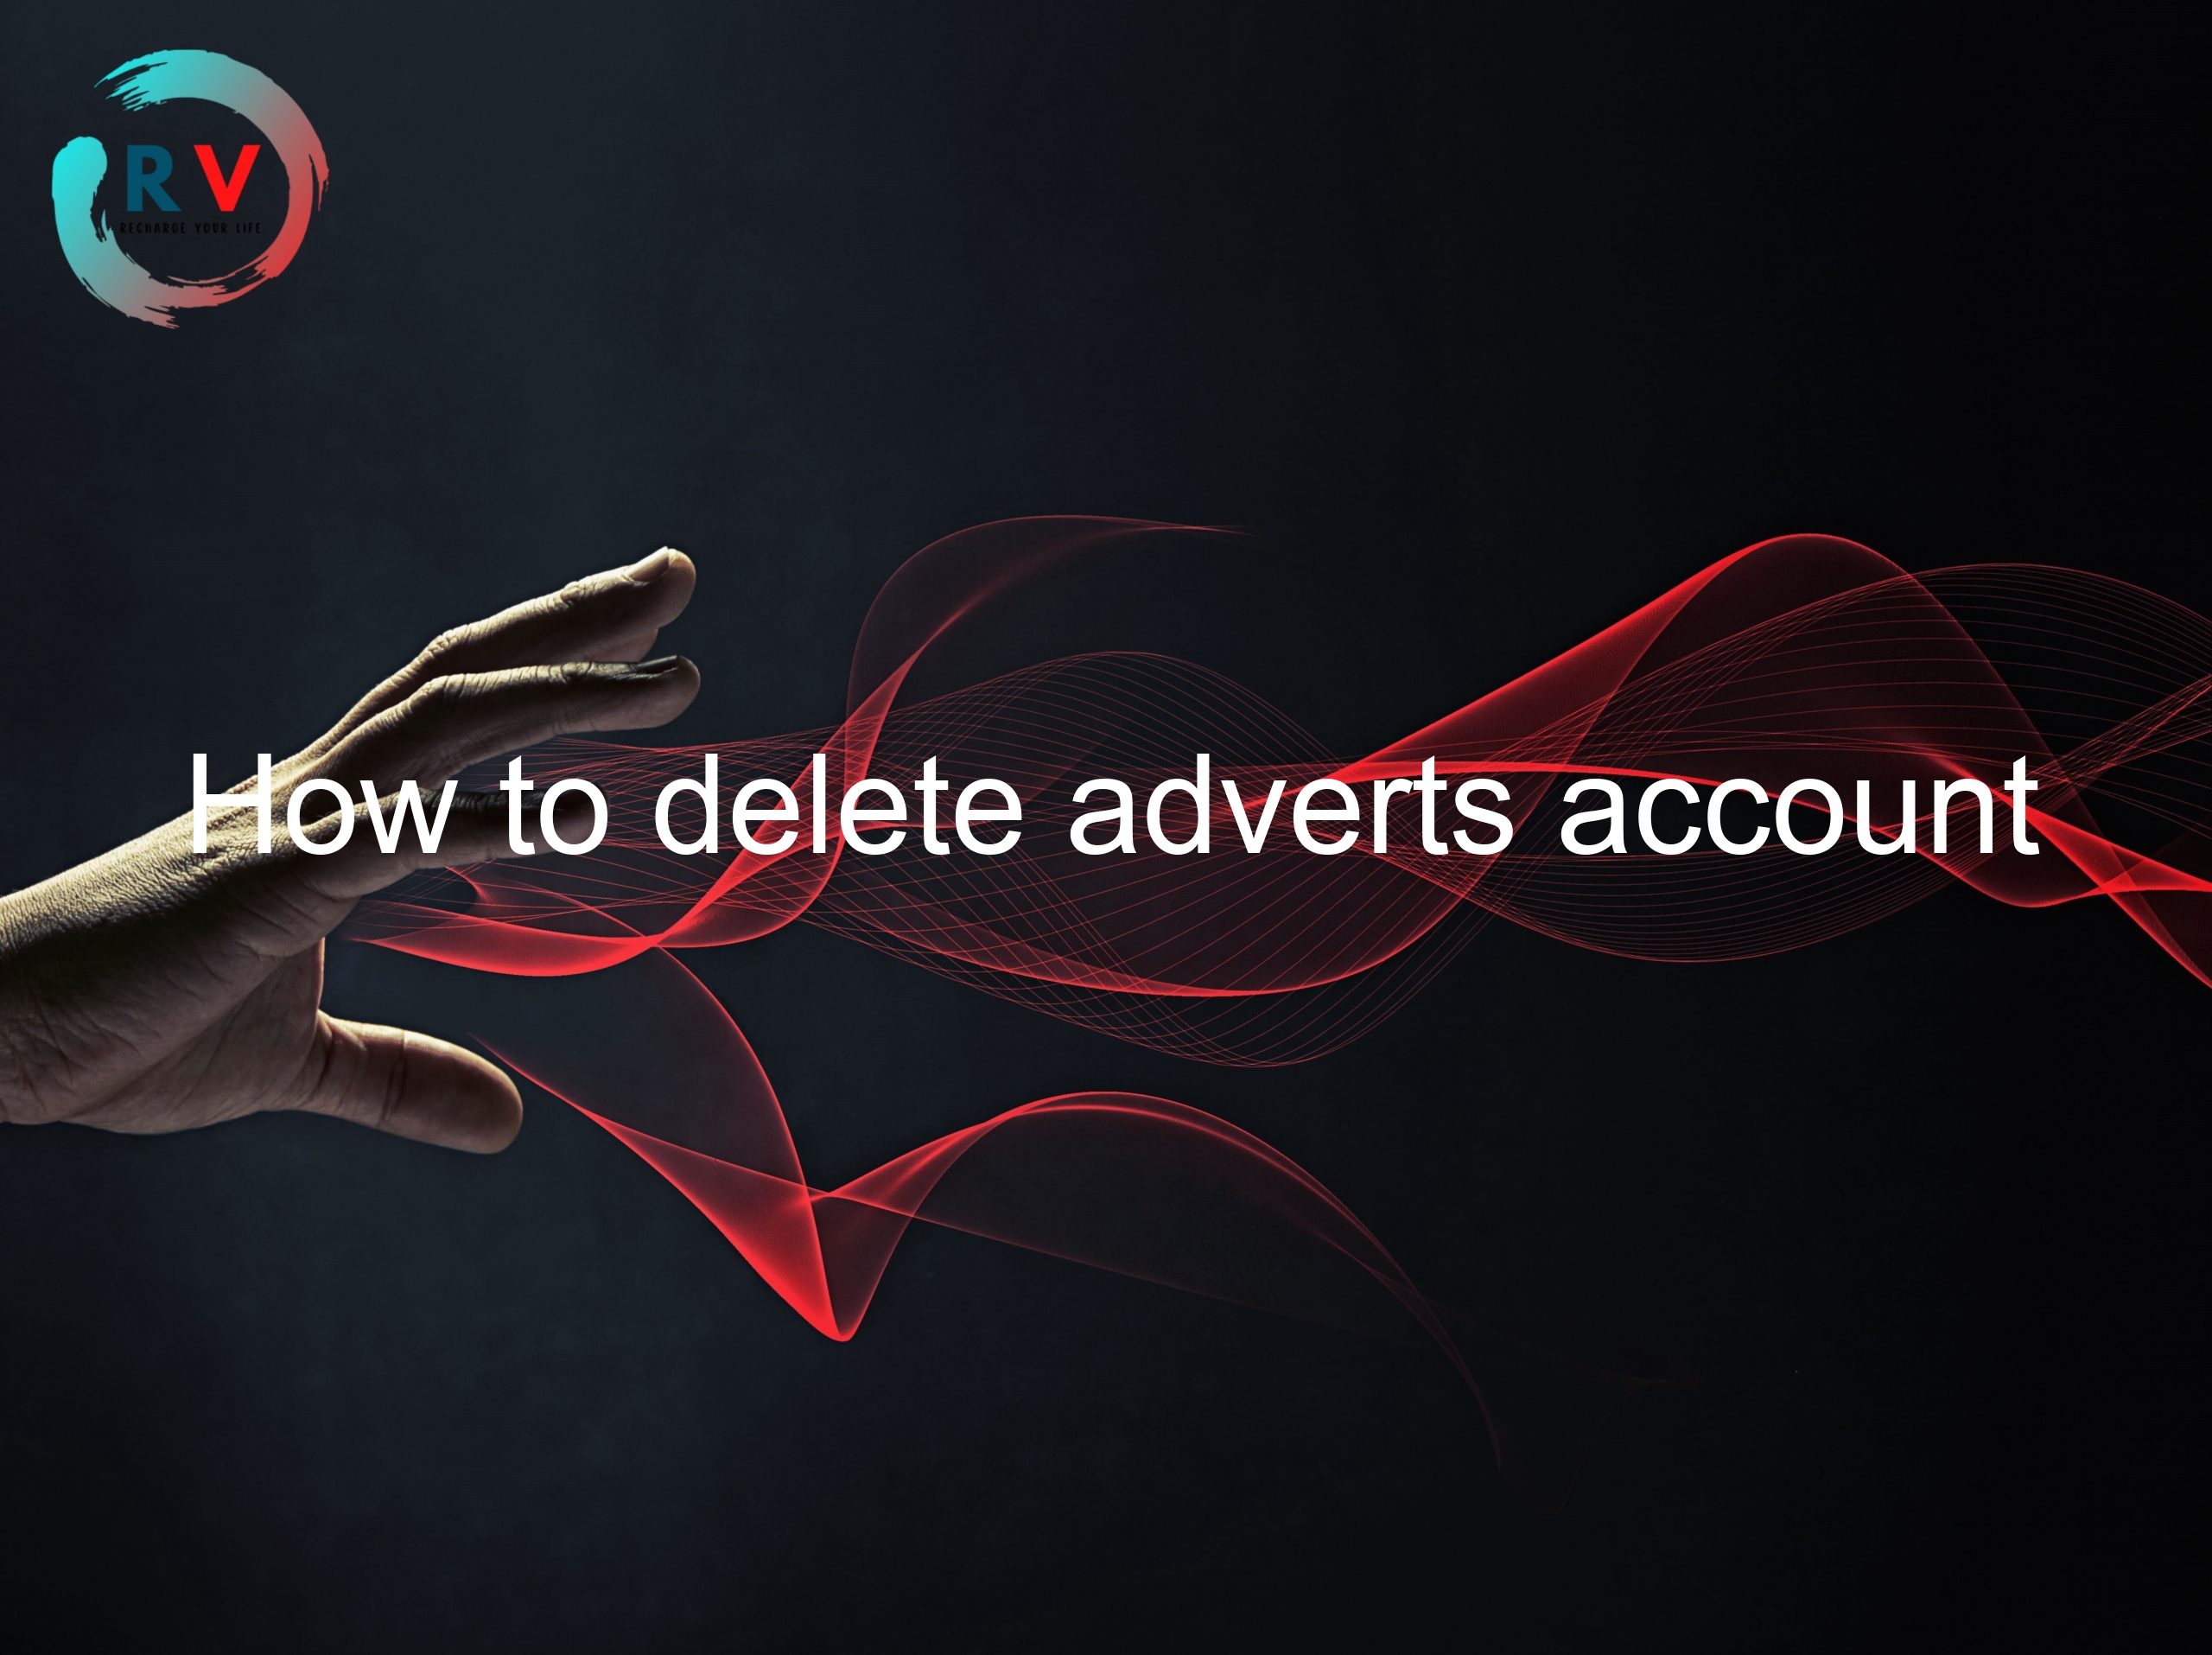 How to delete adverts account